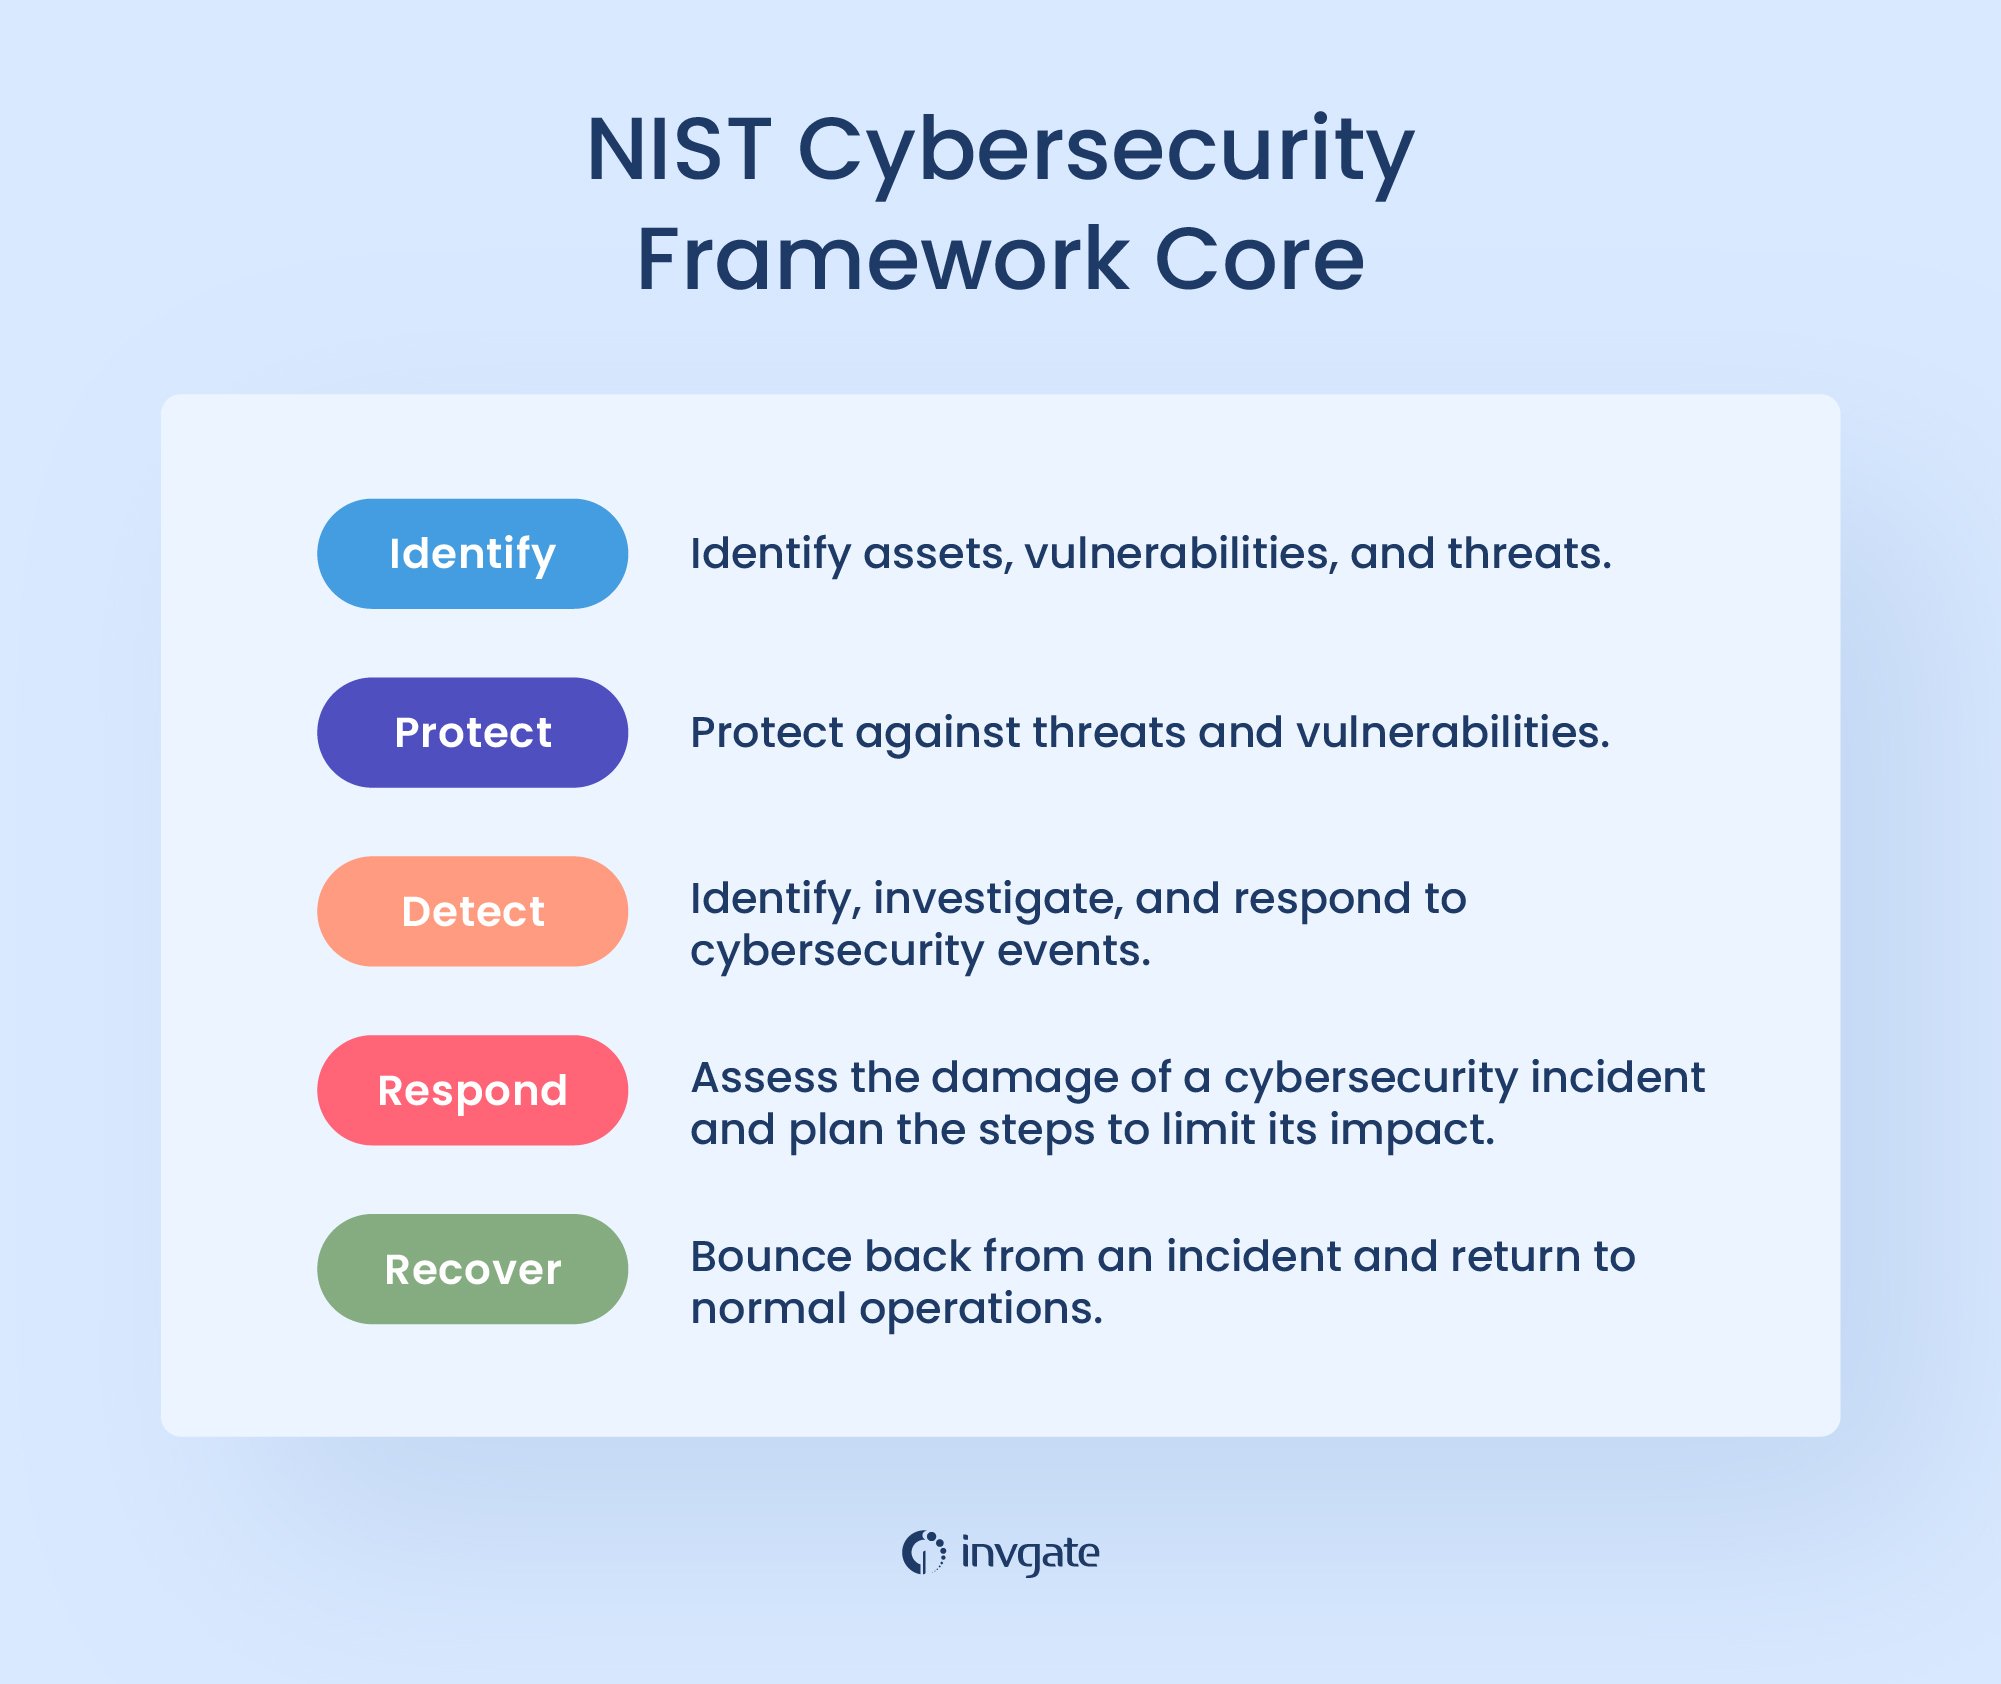 The NIST Cybersecurity Framework Core consists of five high-level functions: Identify, Protect, Detect, Respond, and Recover.